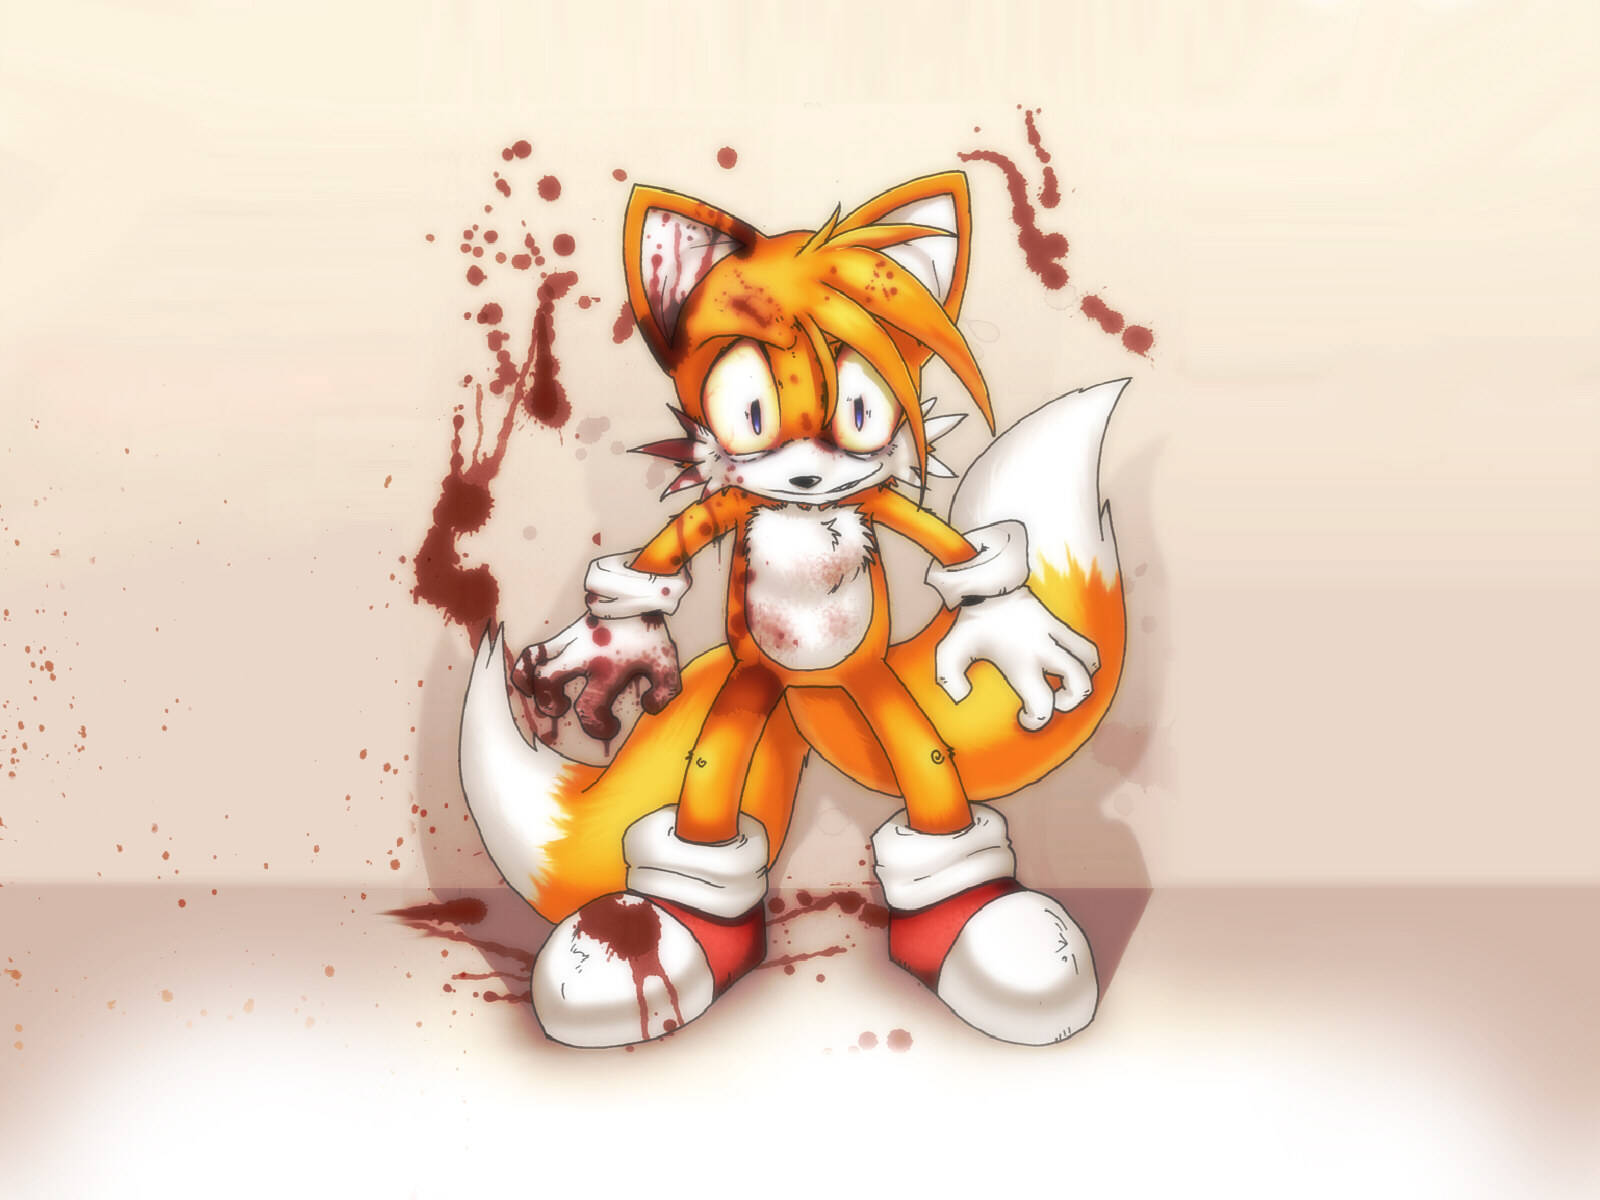 Sonic Miles Prower Aka Tails Wallpaper